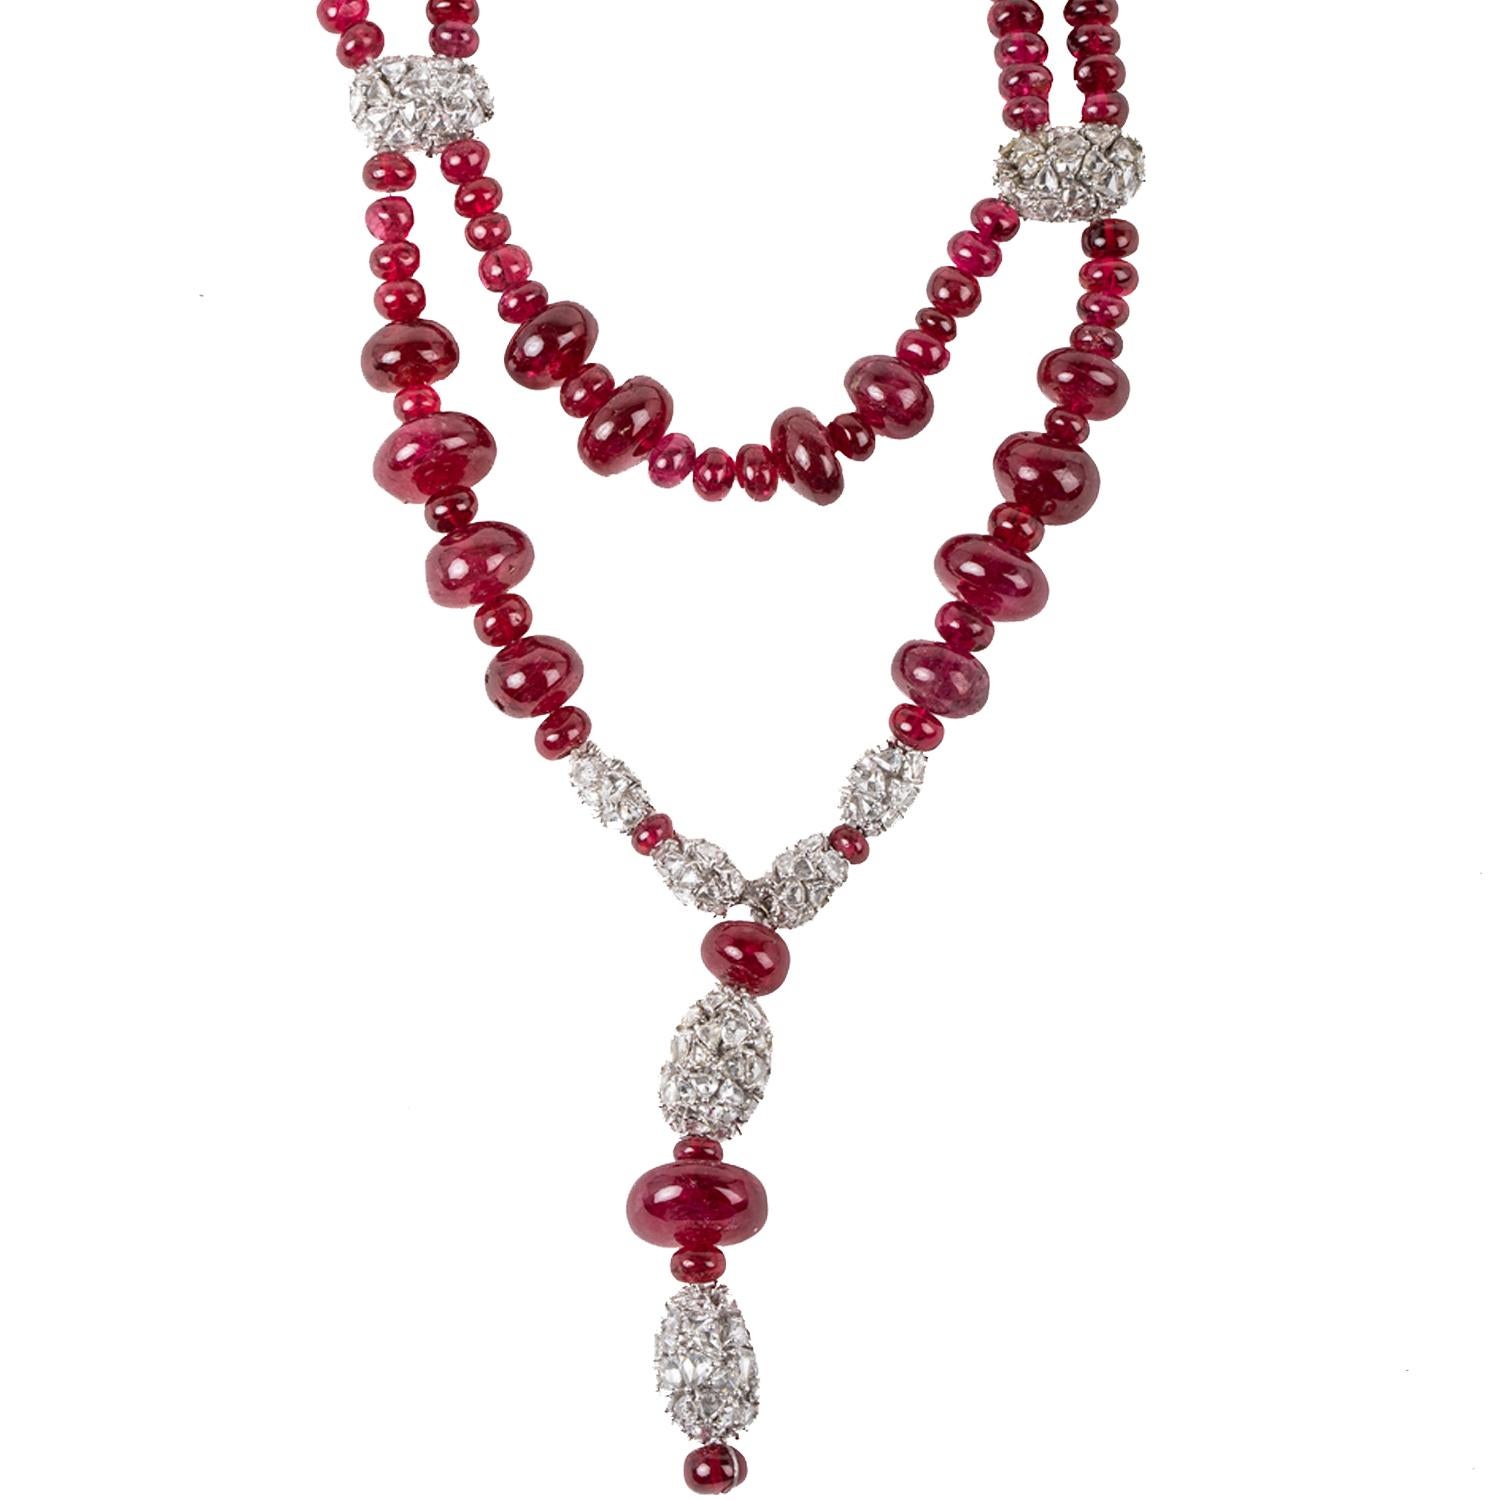 This necklace features deep red color spinel beads from Burma. 
Entwined in the necklace are diamond clusters set in white gold and a diamond clasp set in platinum.
Appx 250 carat spinel.